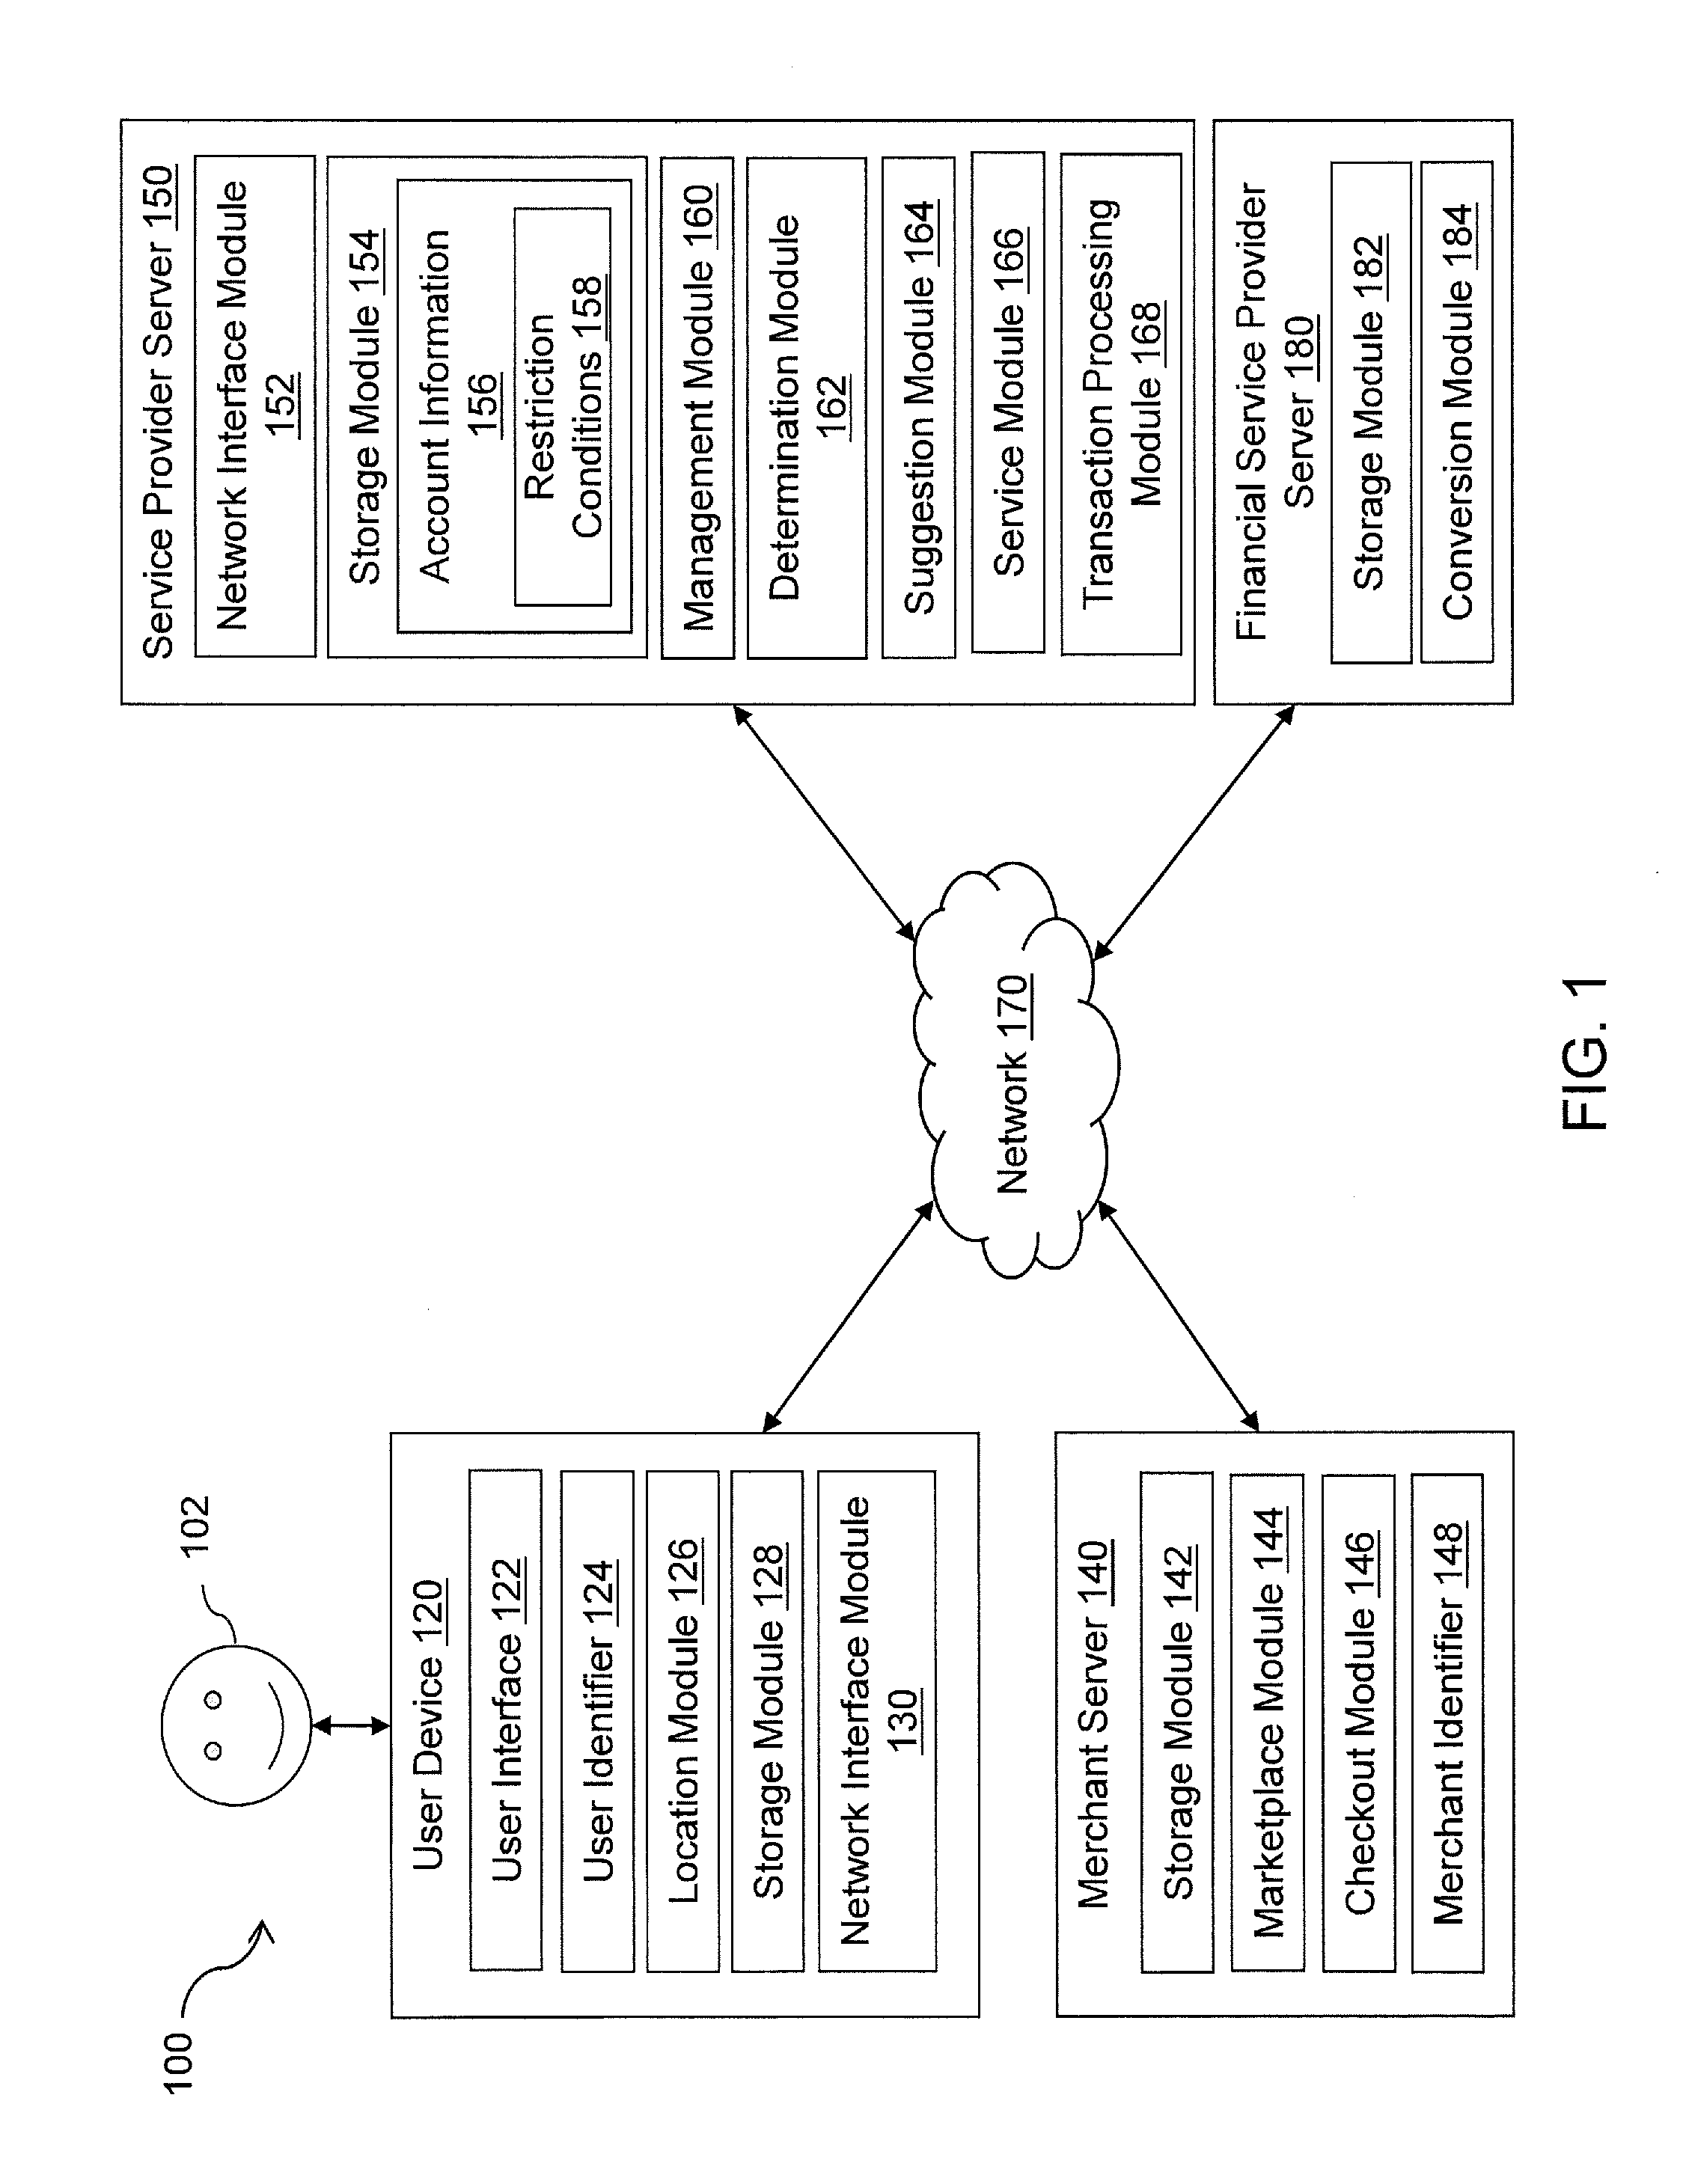 Systems and methods for generating suggestions and enforcing transaction restrictions